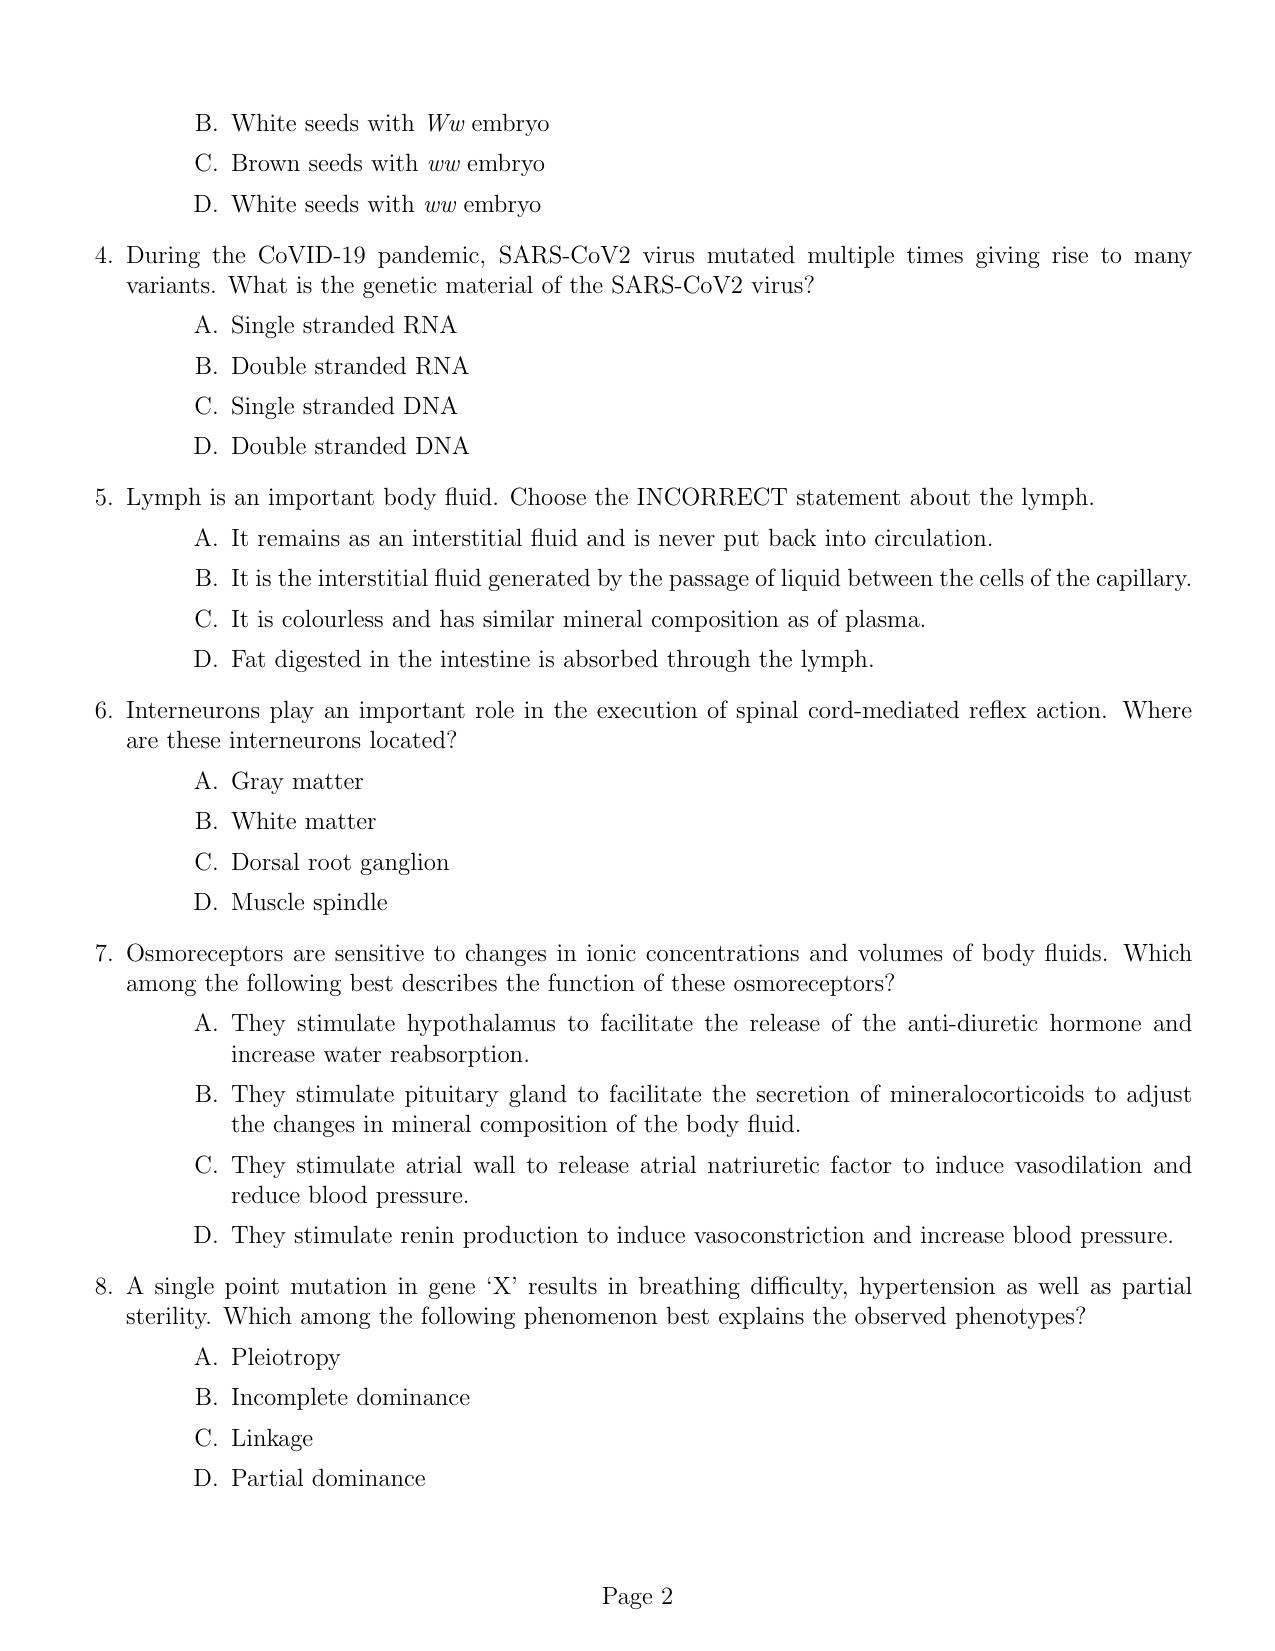 IISER Aptitude Test 2022 English Question Paper - Page 2